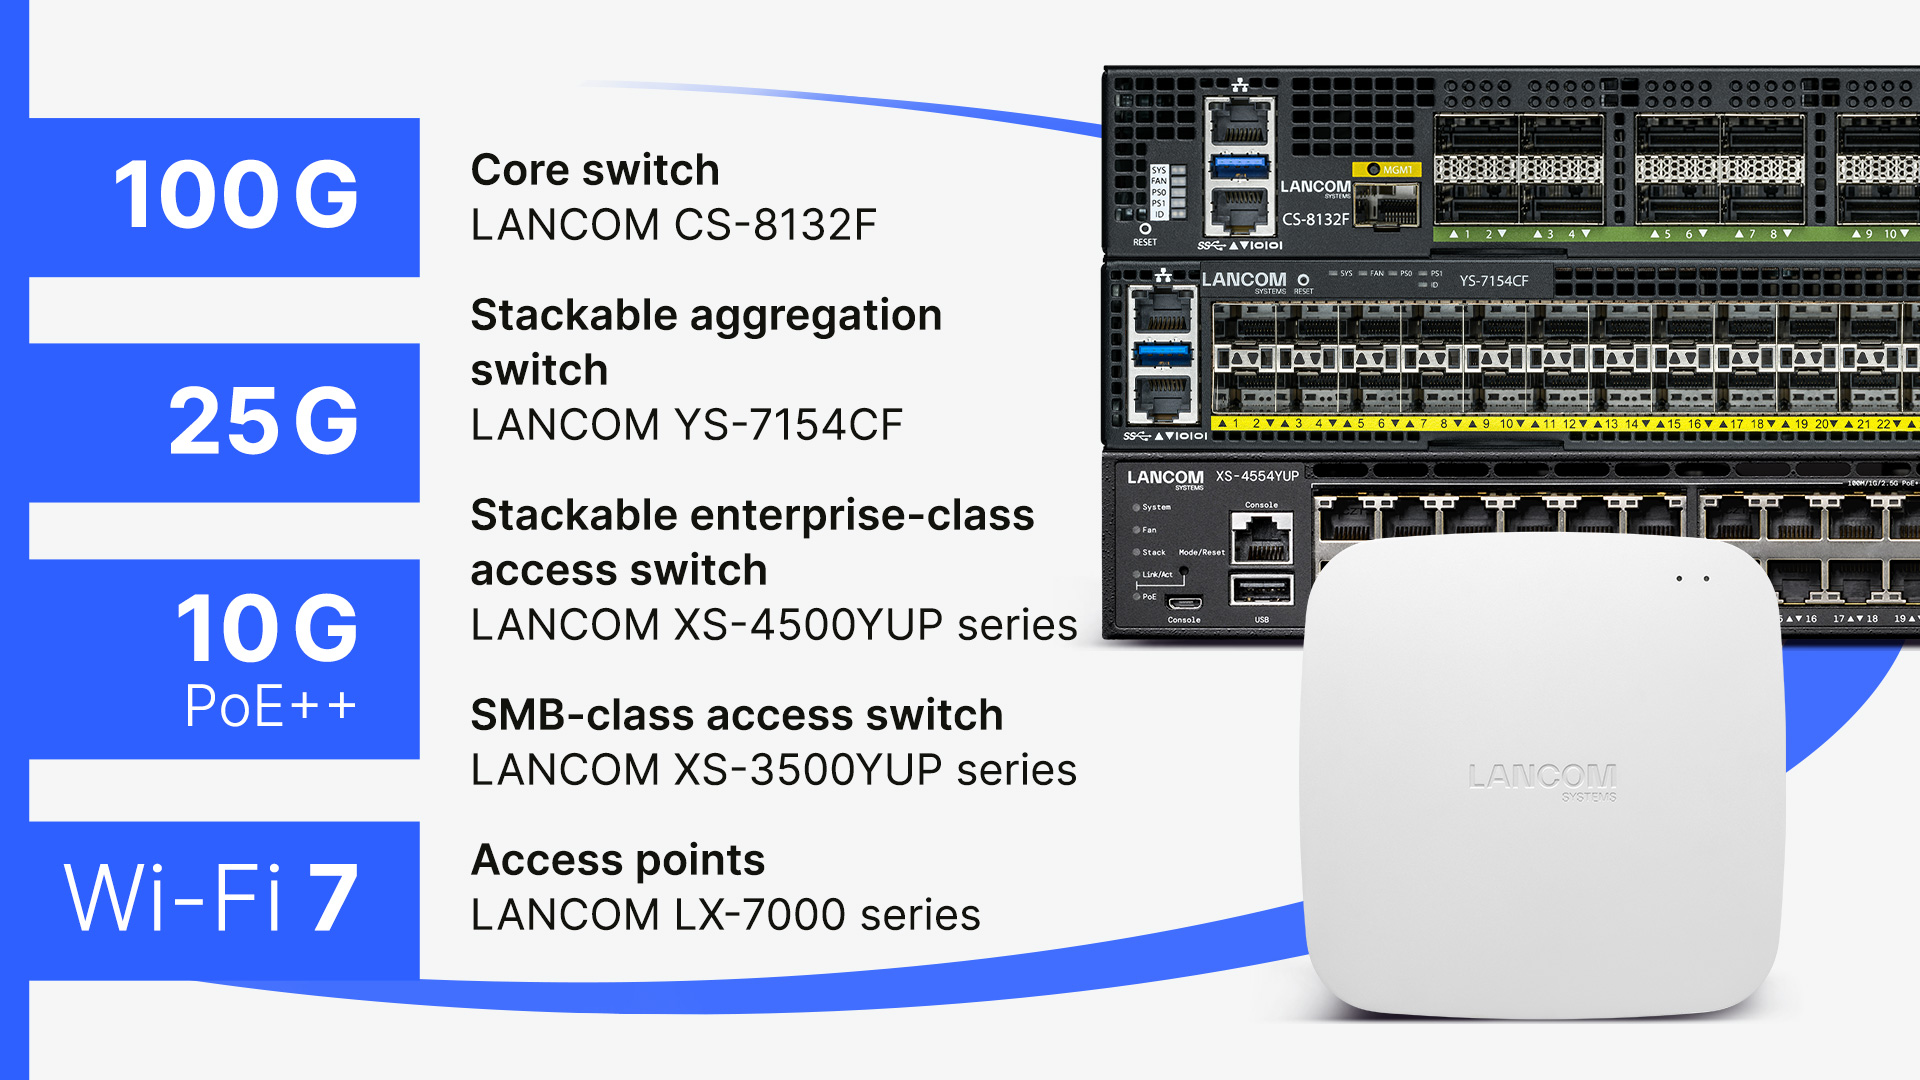 Right: Collage of the LANCOM access point LX-7500 and the LANCOM switches CS-8132F, YS-7154CF, and XS-4554YUP, left: names of the products and highlight features such as 100G, 25G, 10G PoE++, and Wi-Fi 7